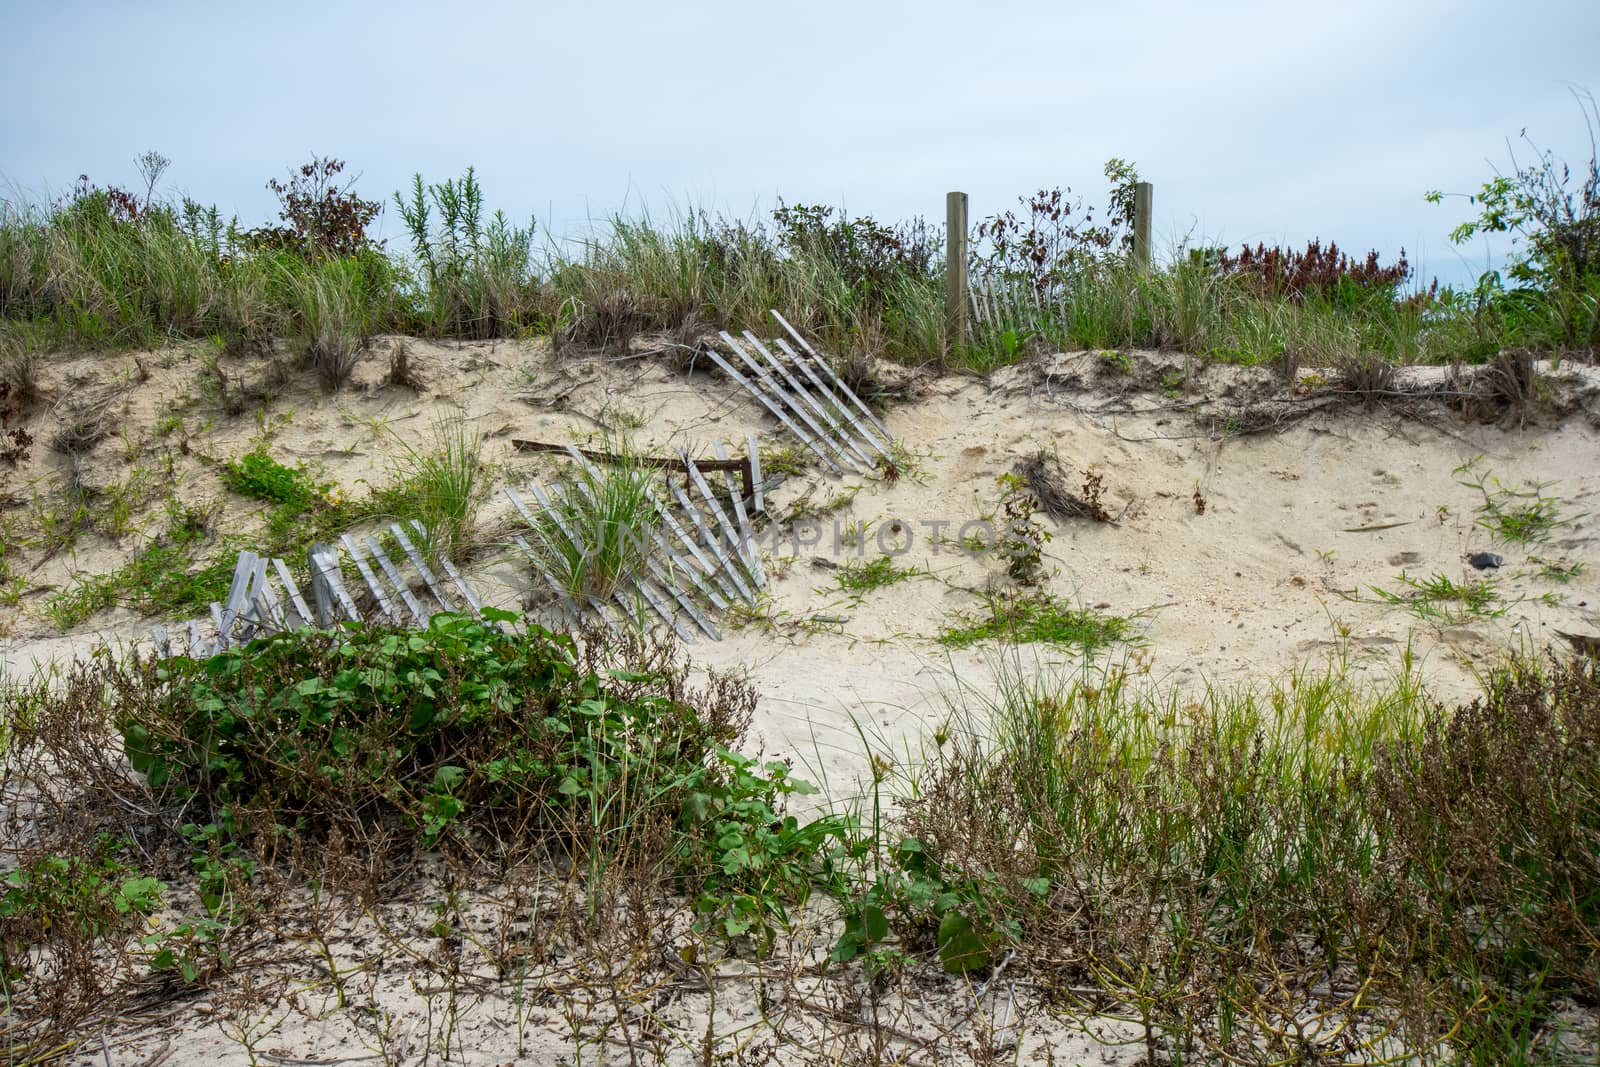 A Sand Dune With a Broken Wood Fence And Overgrown Plants on the by bju12290